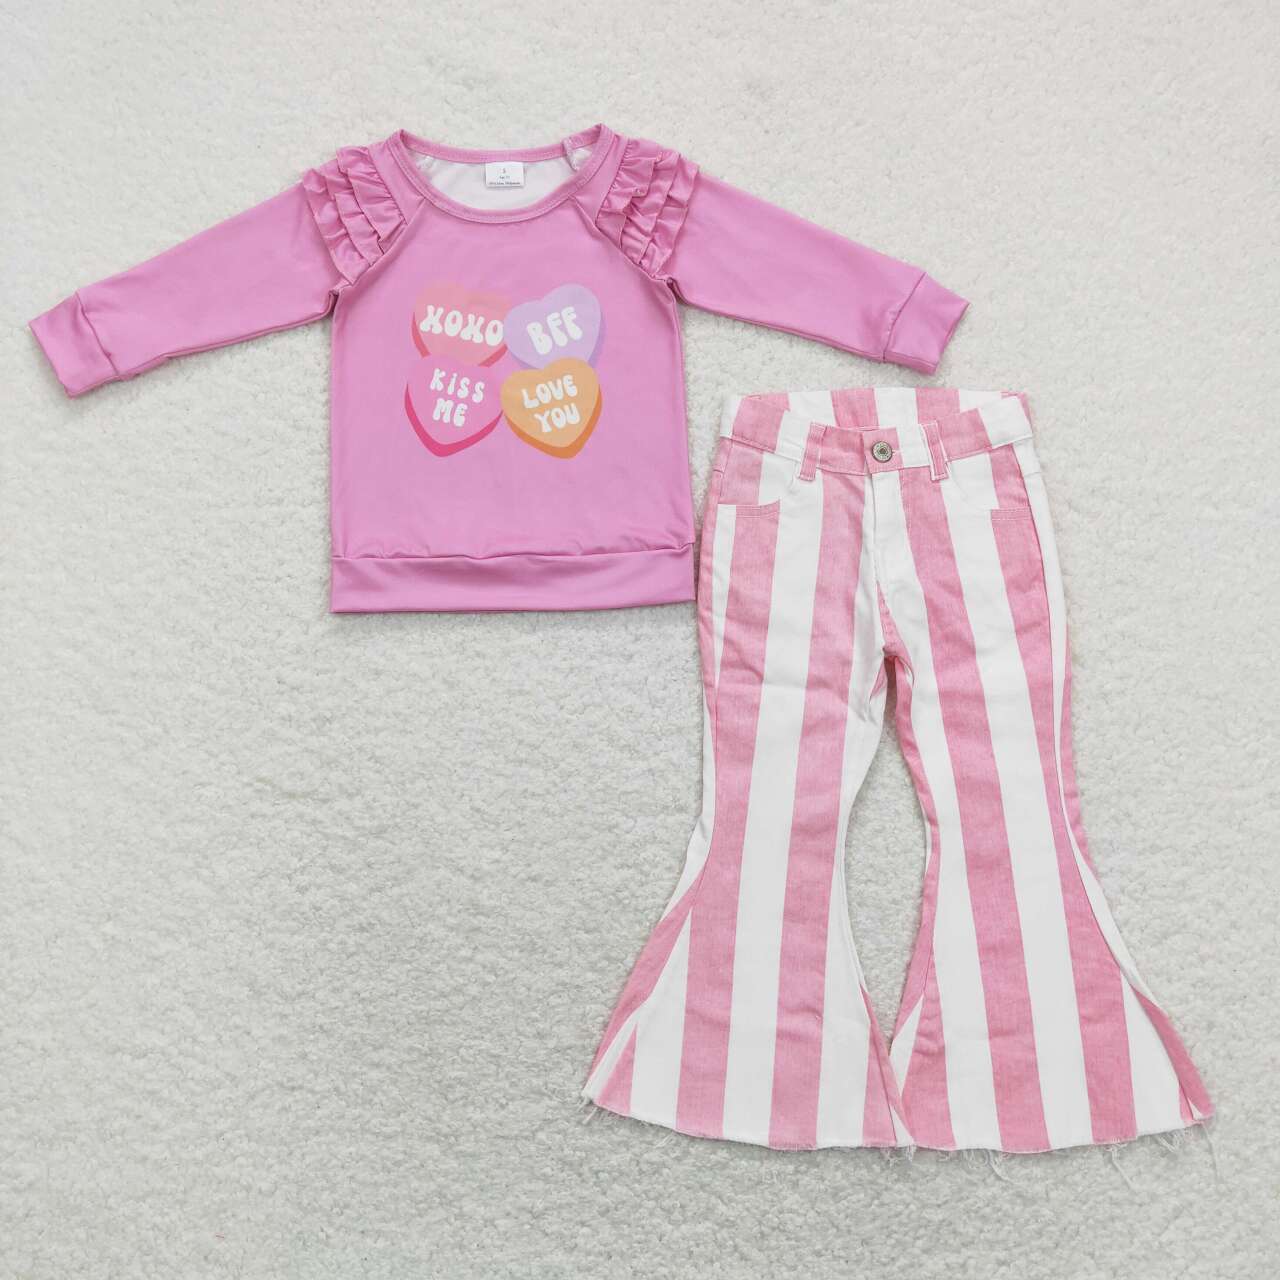 xoxo valentines day shirt pink stripes jeans bell bottoms spring fall outfit